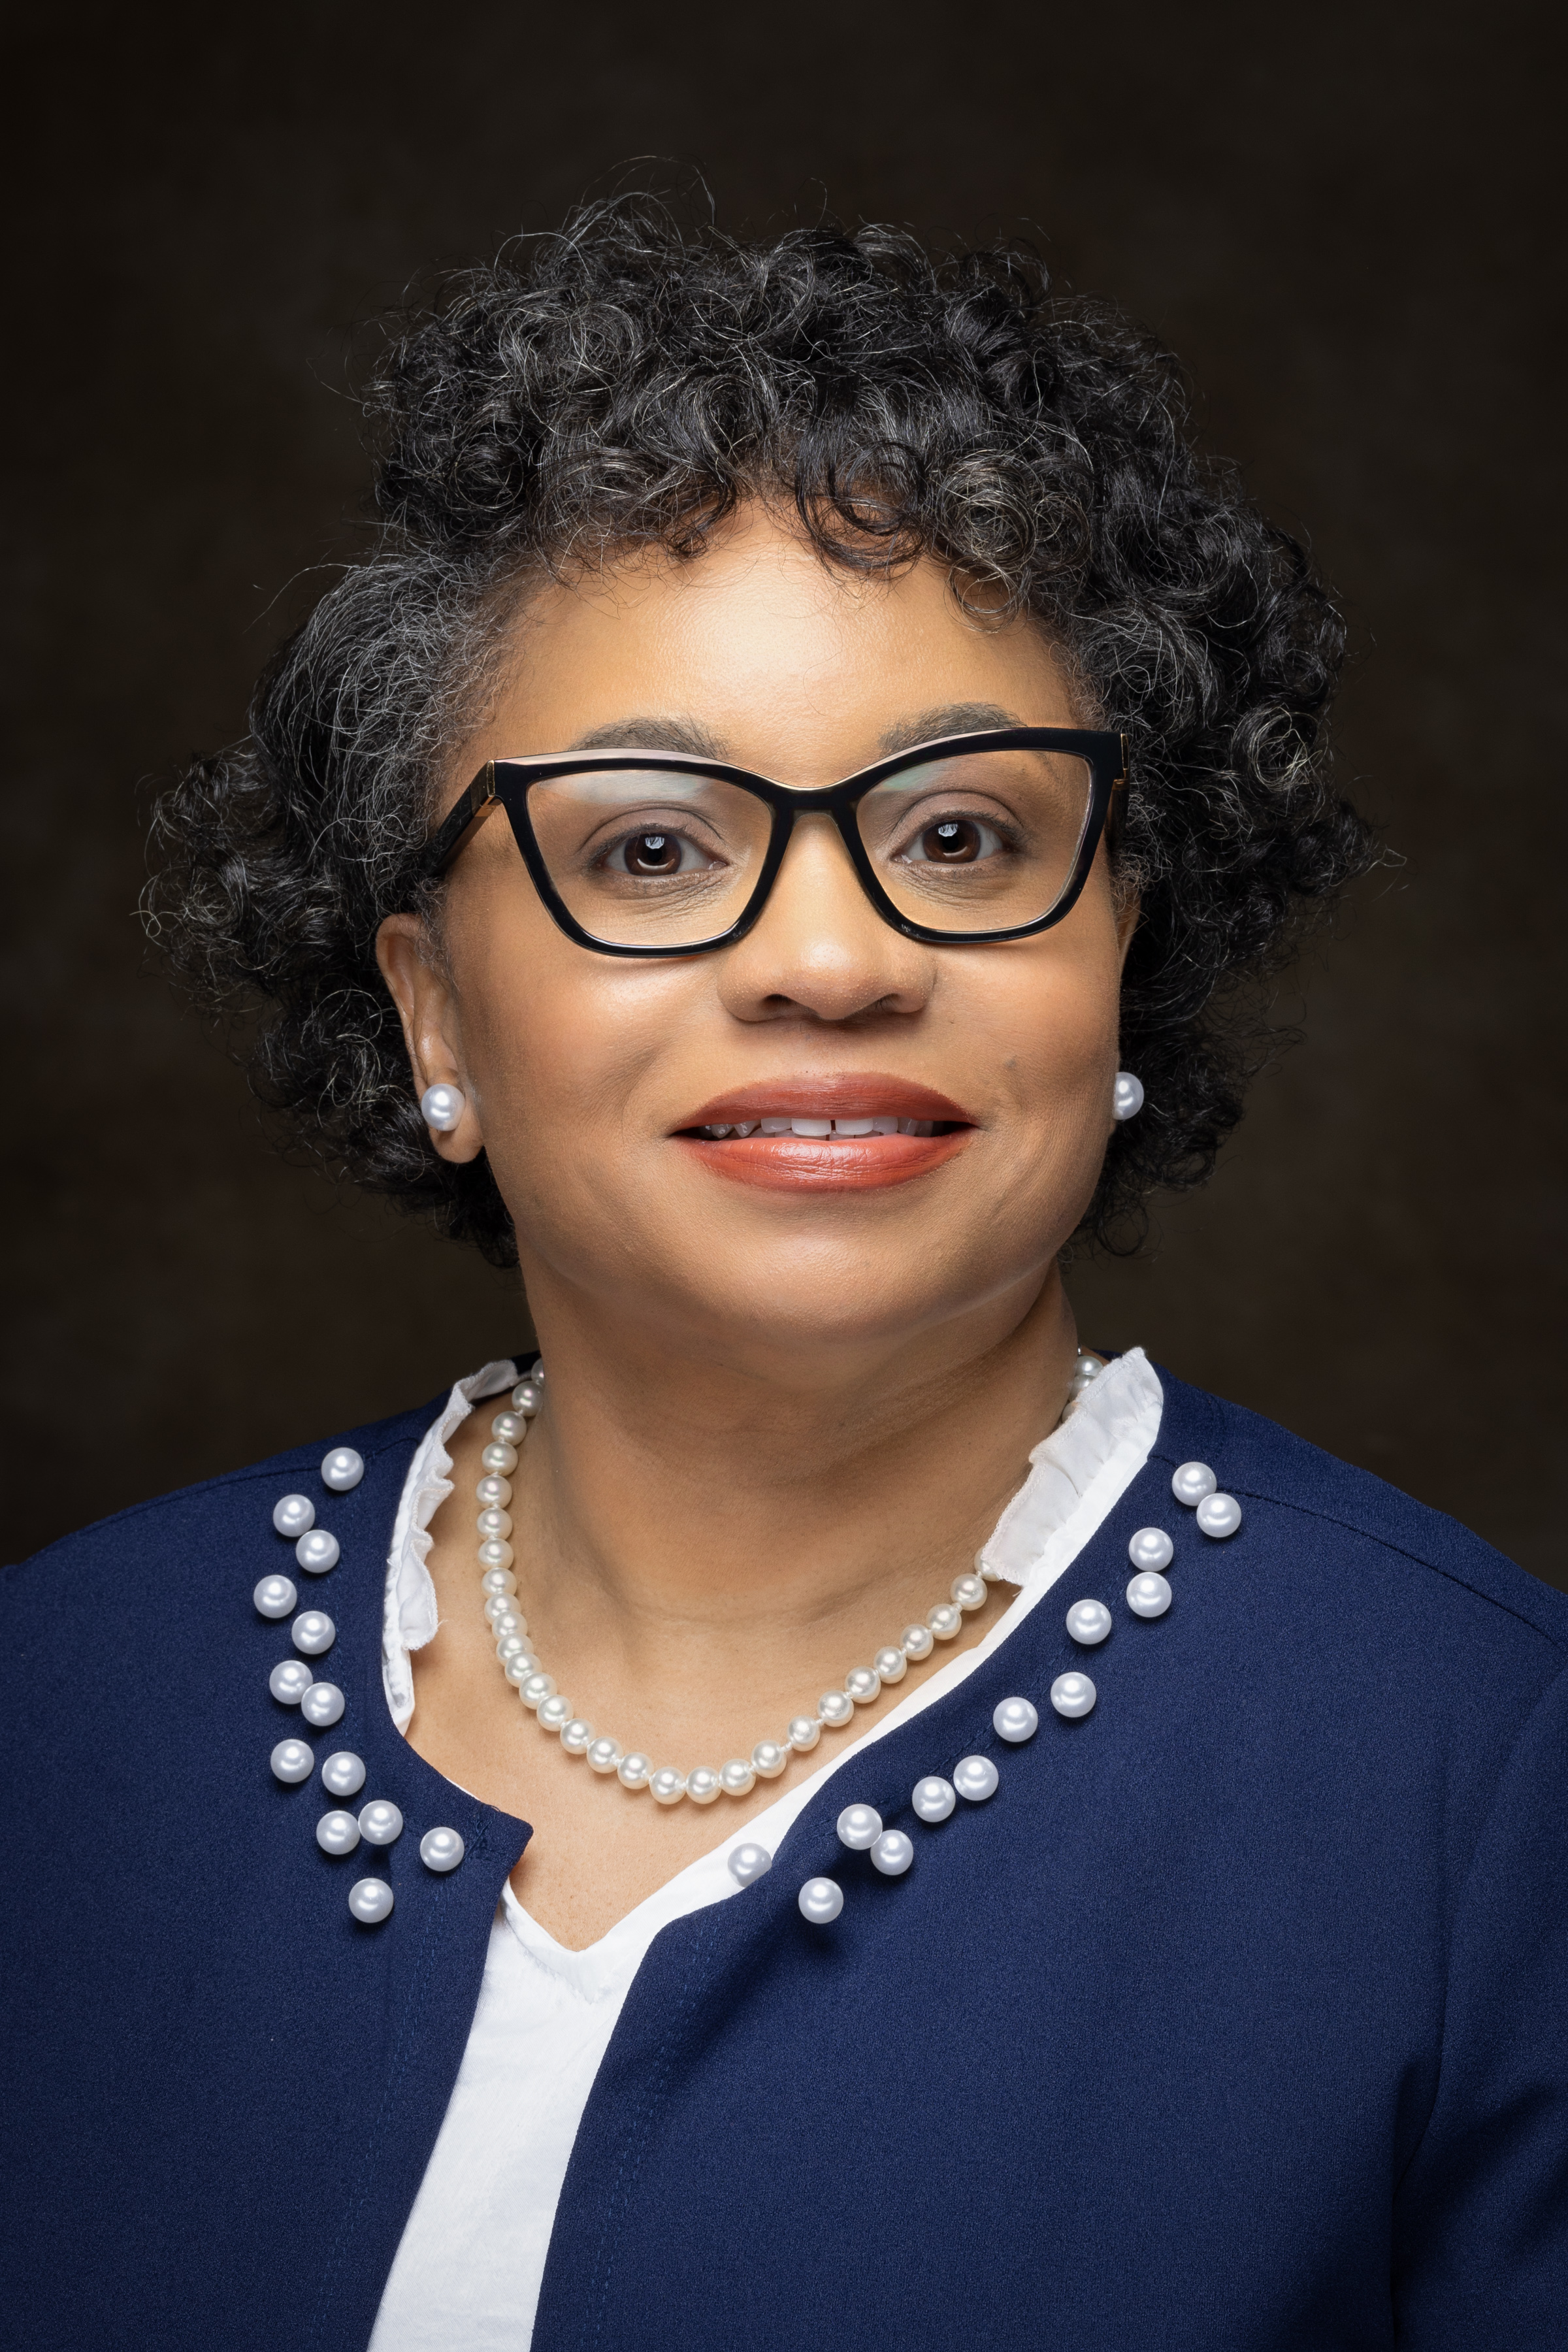 Dr. Sonja M. Brown, Associate Vice Chancellor for Academic and Faculty Affairs